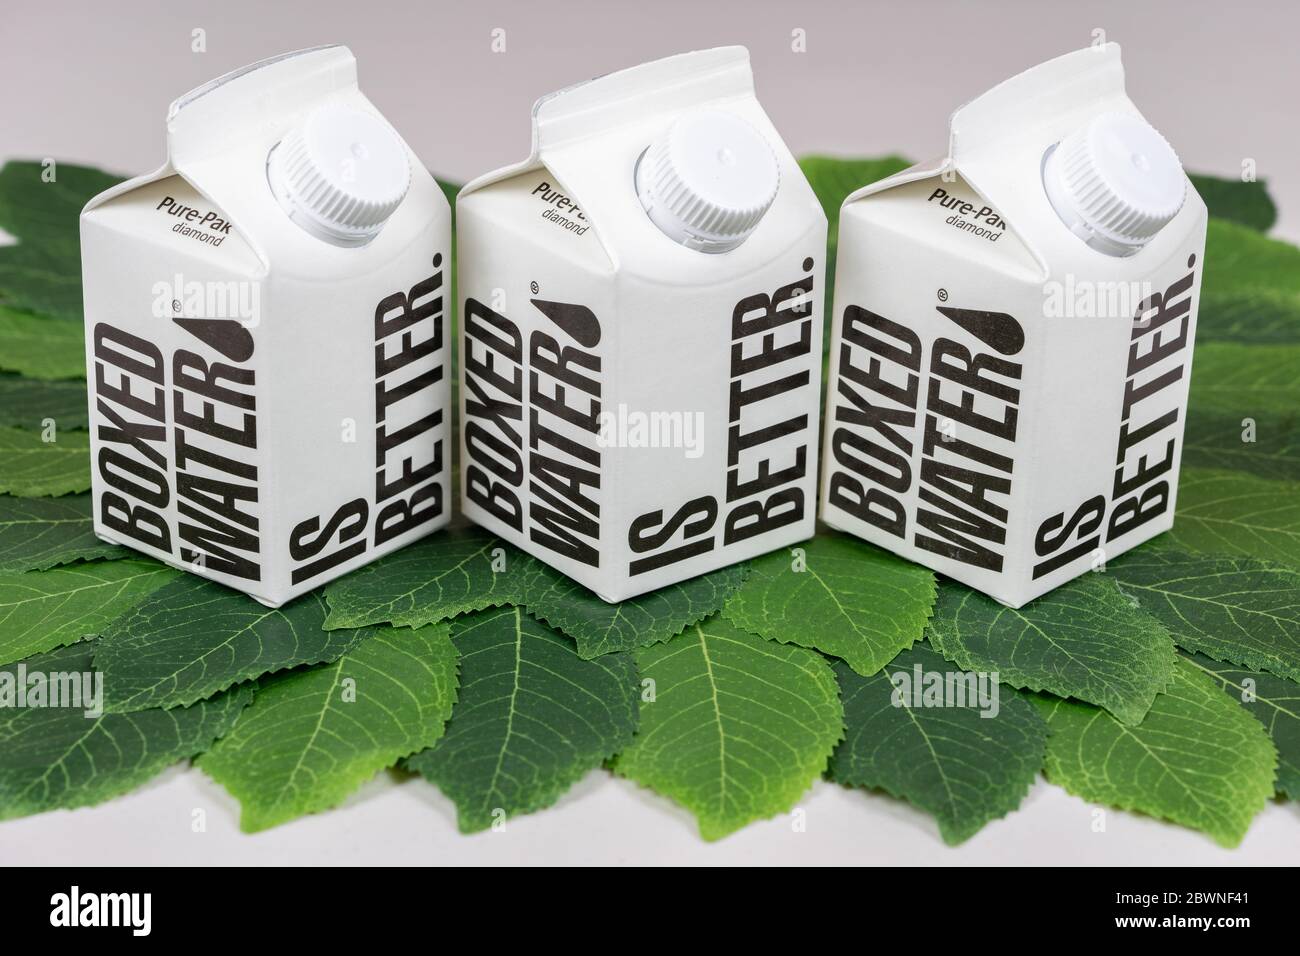 Worcester, PA - May 29, 2020: 'Boxed Water is Better' is the slogan on these boxes of purified water from the Boxed Water company that uses paper for Stock Photo